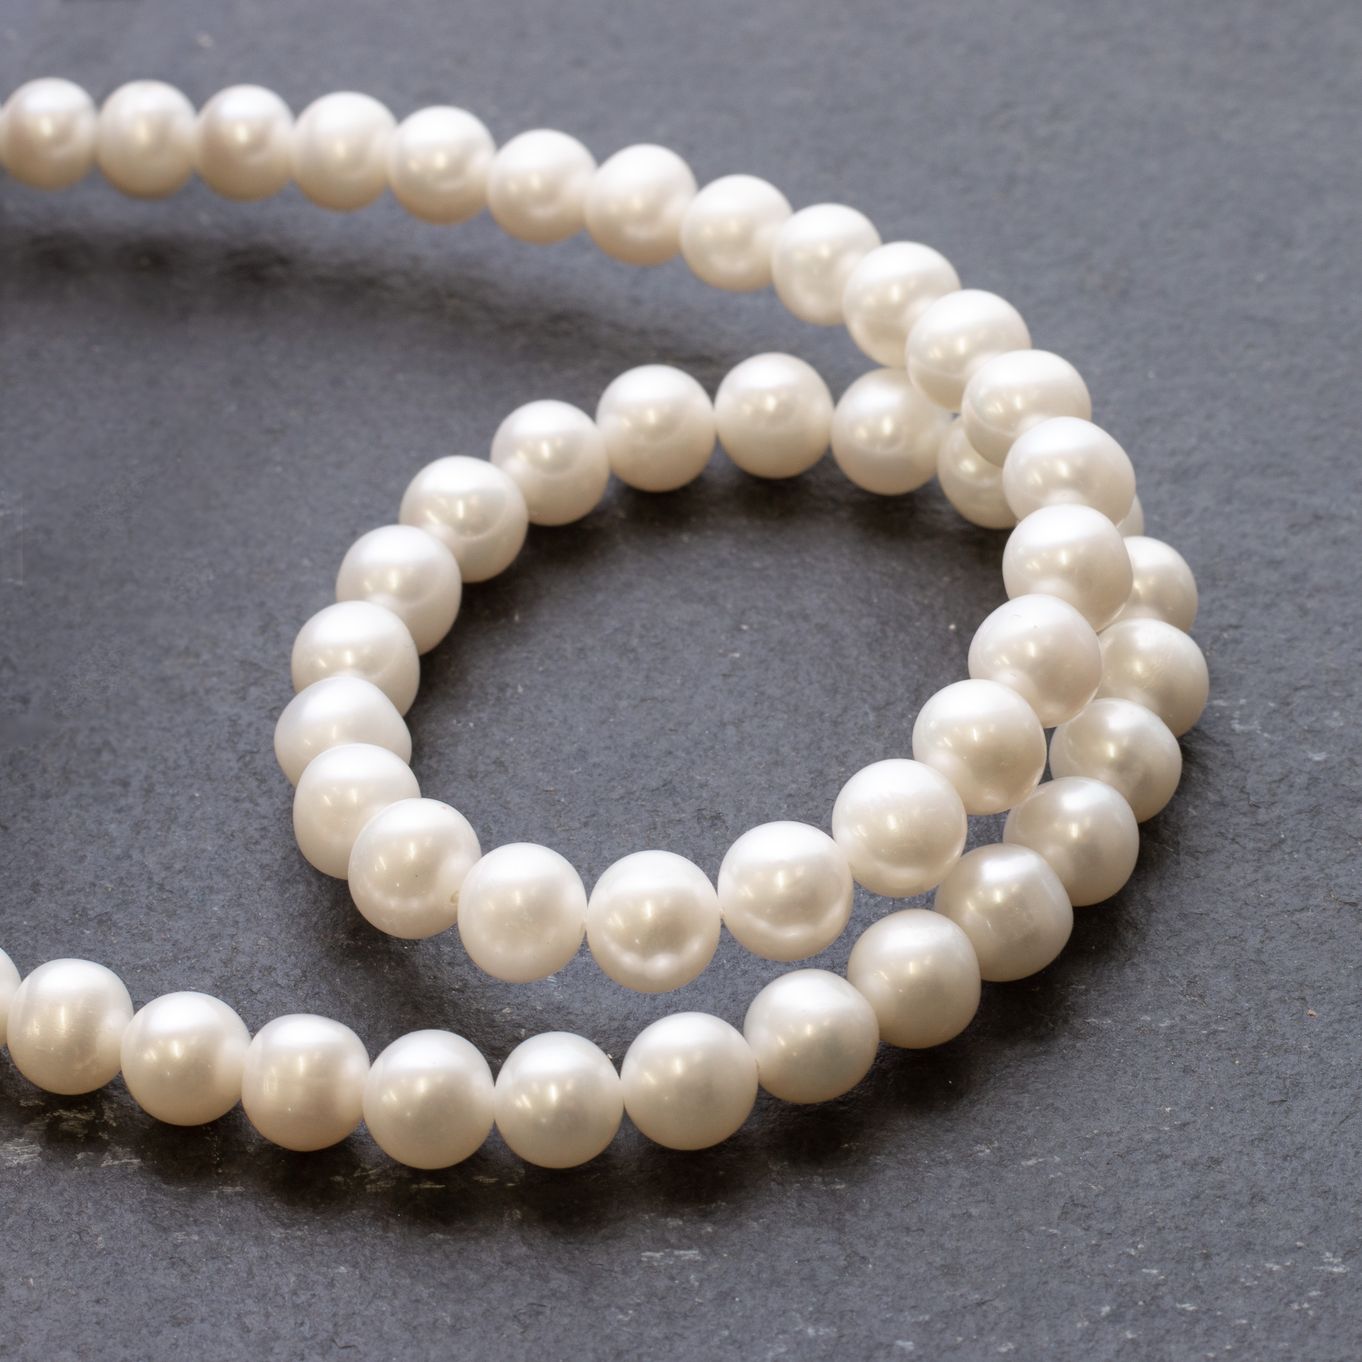 Cultured Freshwater Roundish White Pearls - Approx 9mm